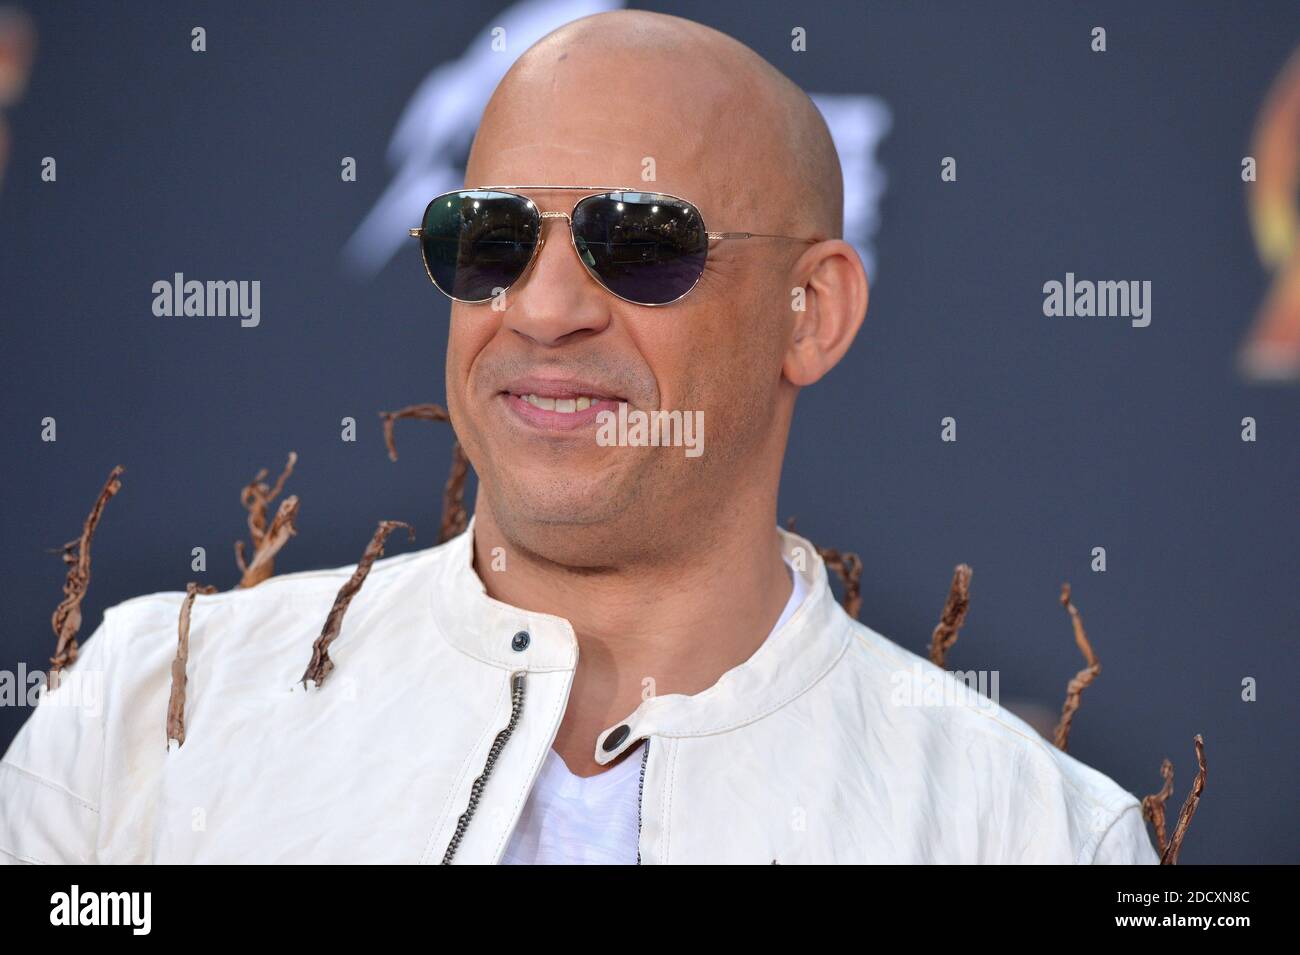 Vin Diesel attends the World Premiere of Avengers: Infinity War on April  23, 2018 in Los Angeles, California. Photo by Lionel Hahn/ABACAPRESS.COM  Stock Photo - Alamy